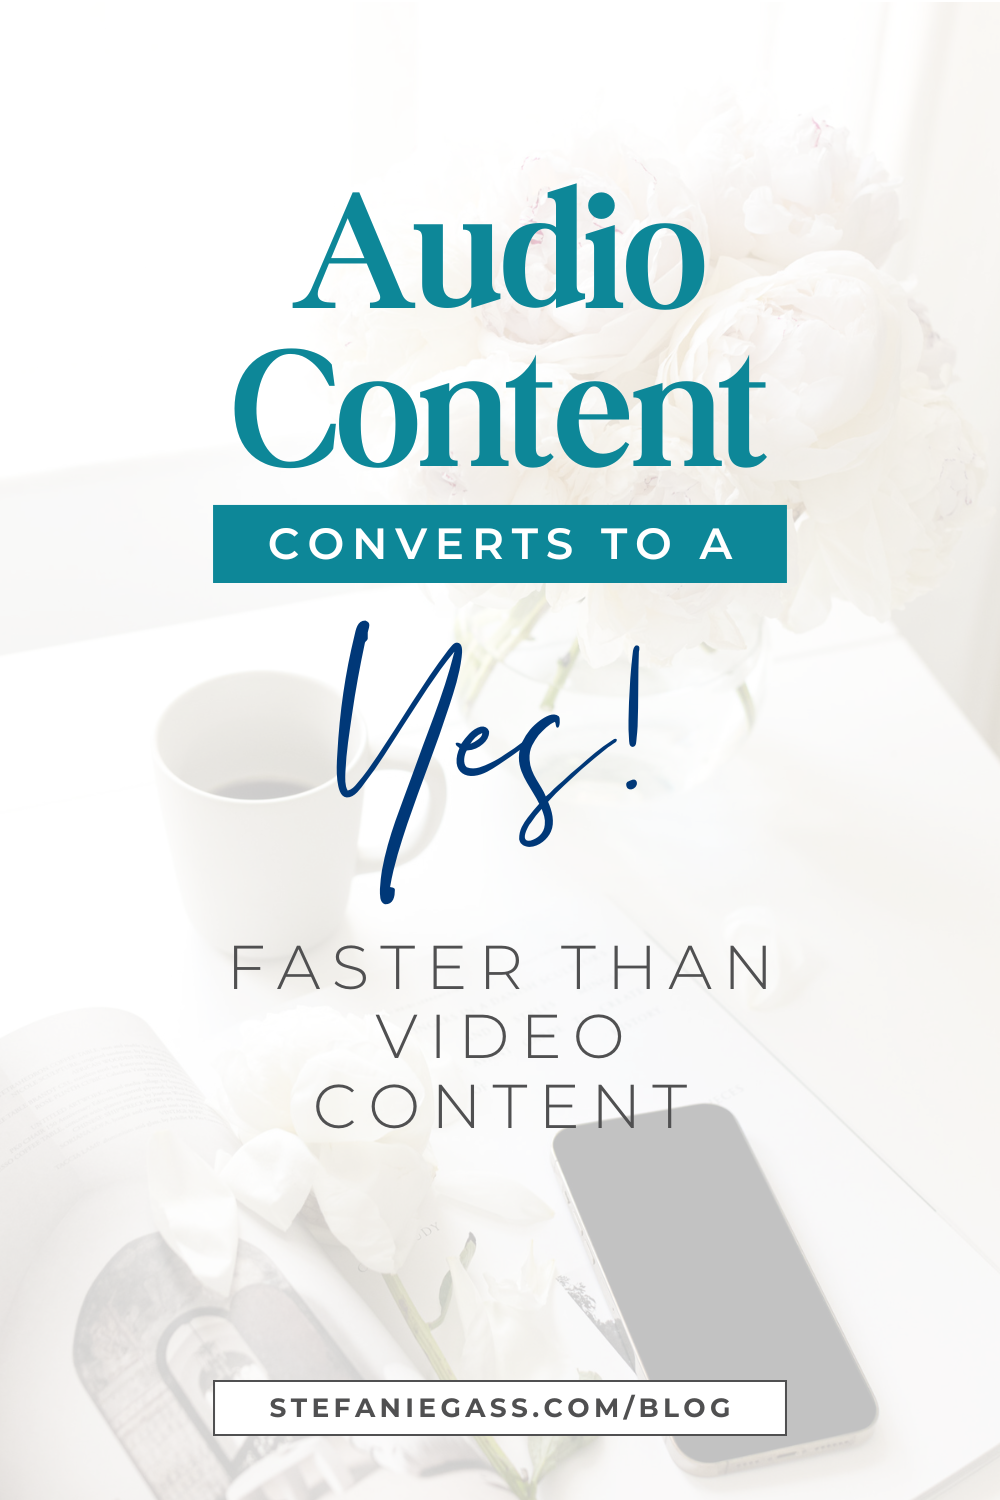 Text reads:  Audio content converts to a Yes! faster than video content. Stefaniegass.com/blog